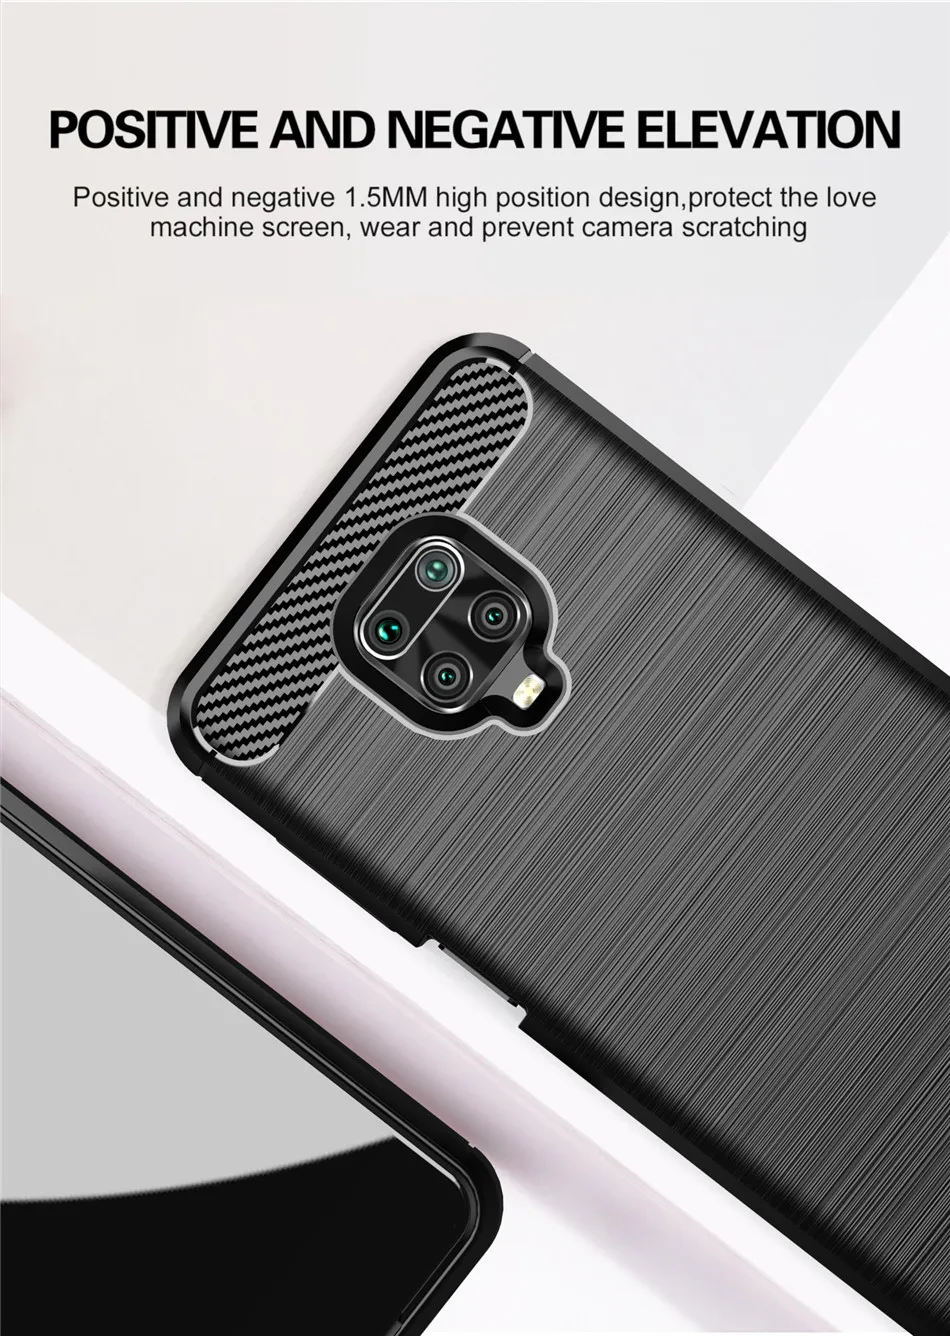 Whyes Soft Silicone Case For Xiaomi Redmi Note 9 Pro Max Note 9 Carbon Fiber ShockProof TPU Cover For Xiaomi Redmi Note 9S Case xiaomi leather case cover